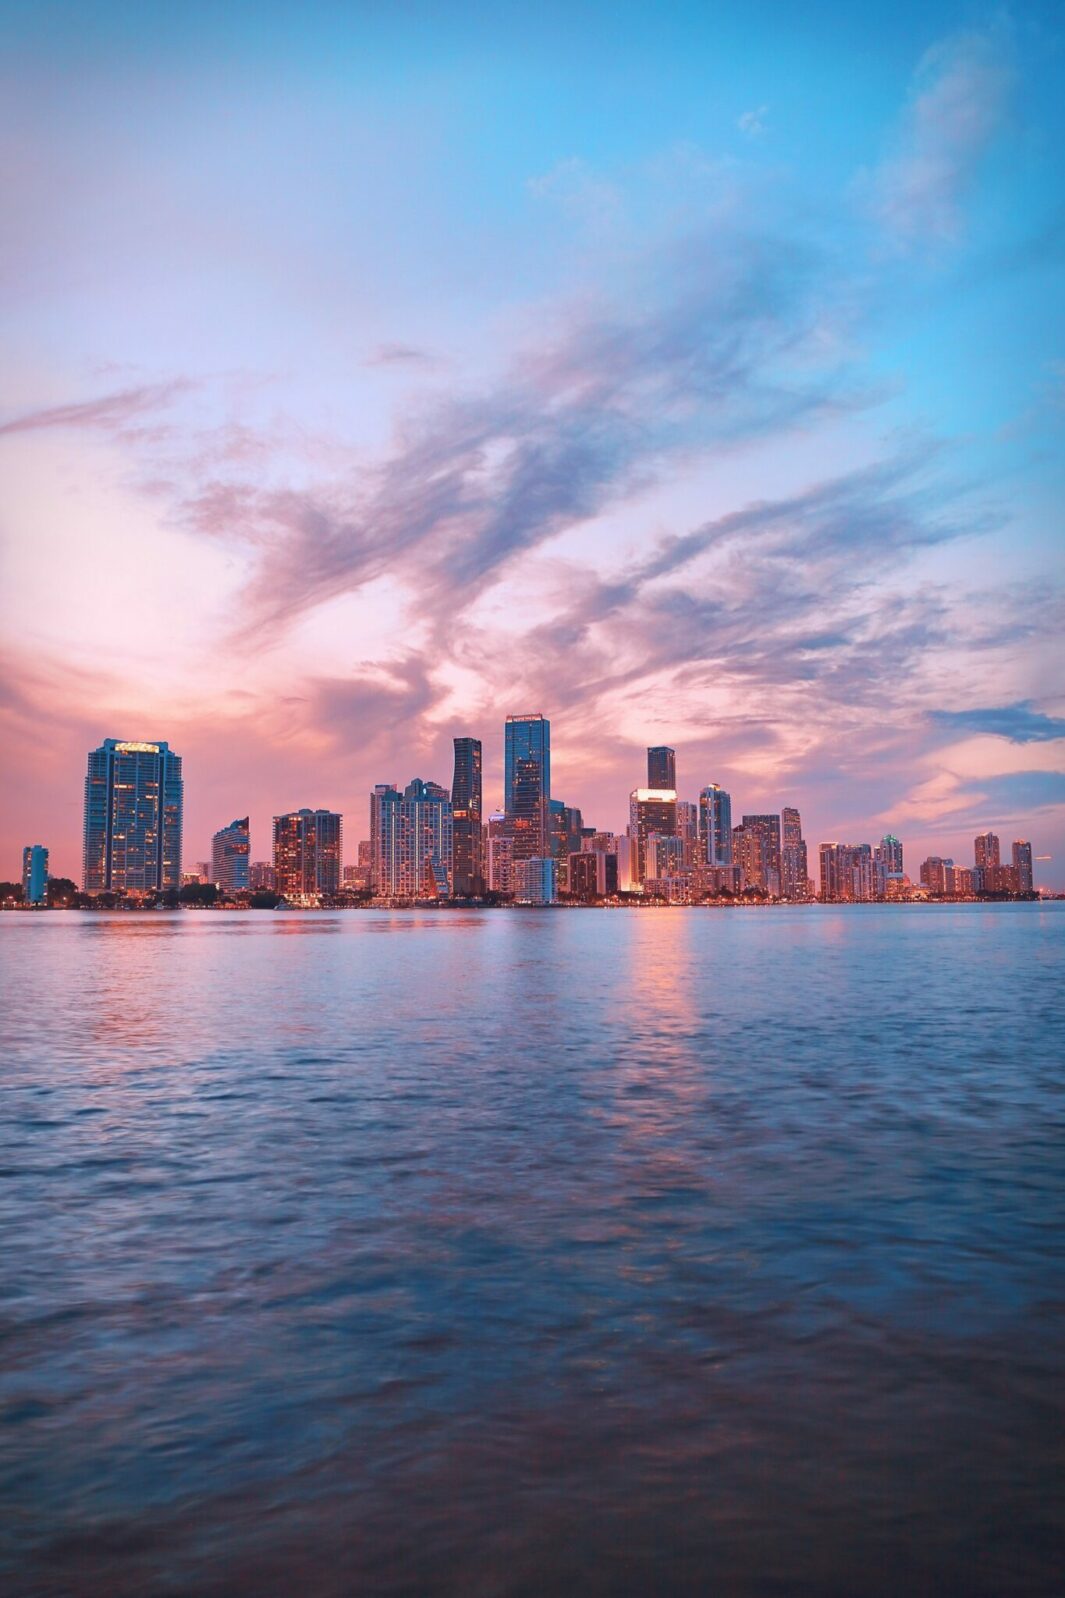 Image of the Miami twighlight skyline with the sea and skyscrapers